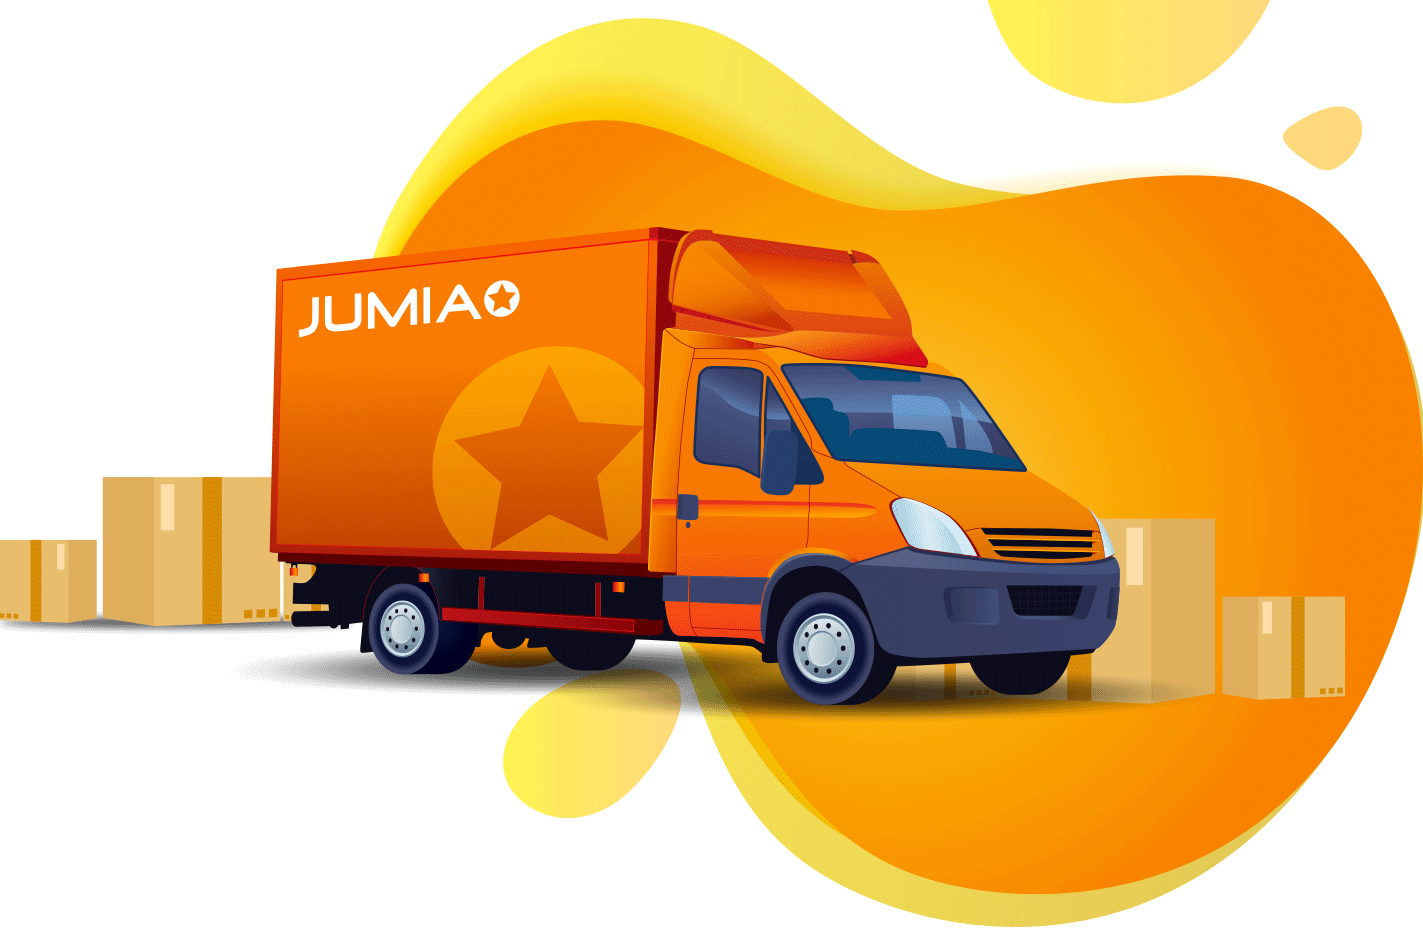 join-jumia-services-for-logistics-solutions-online-jumia-egypt